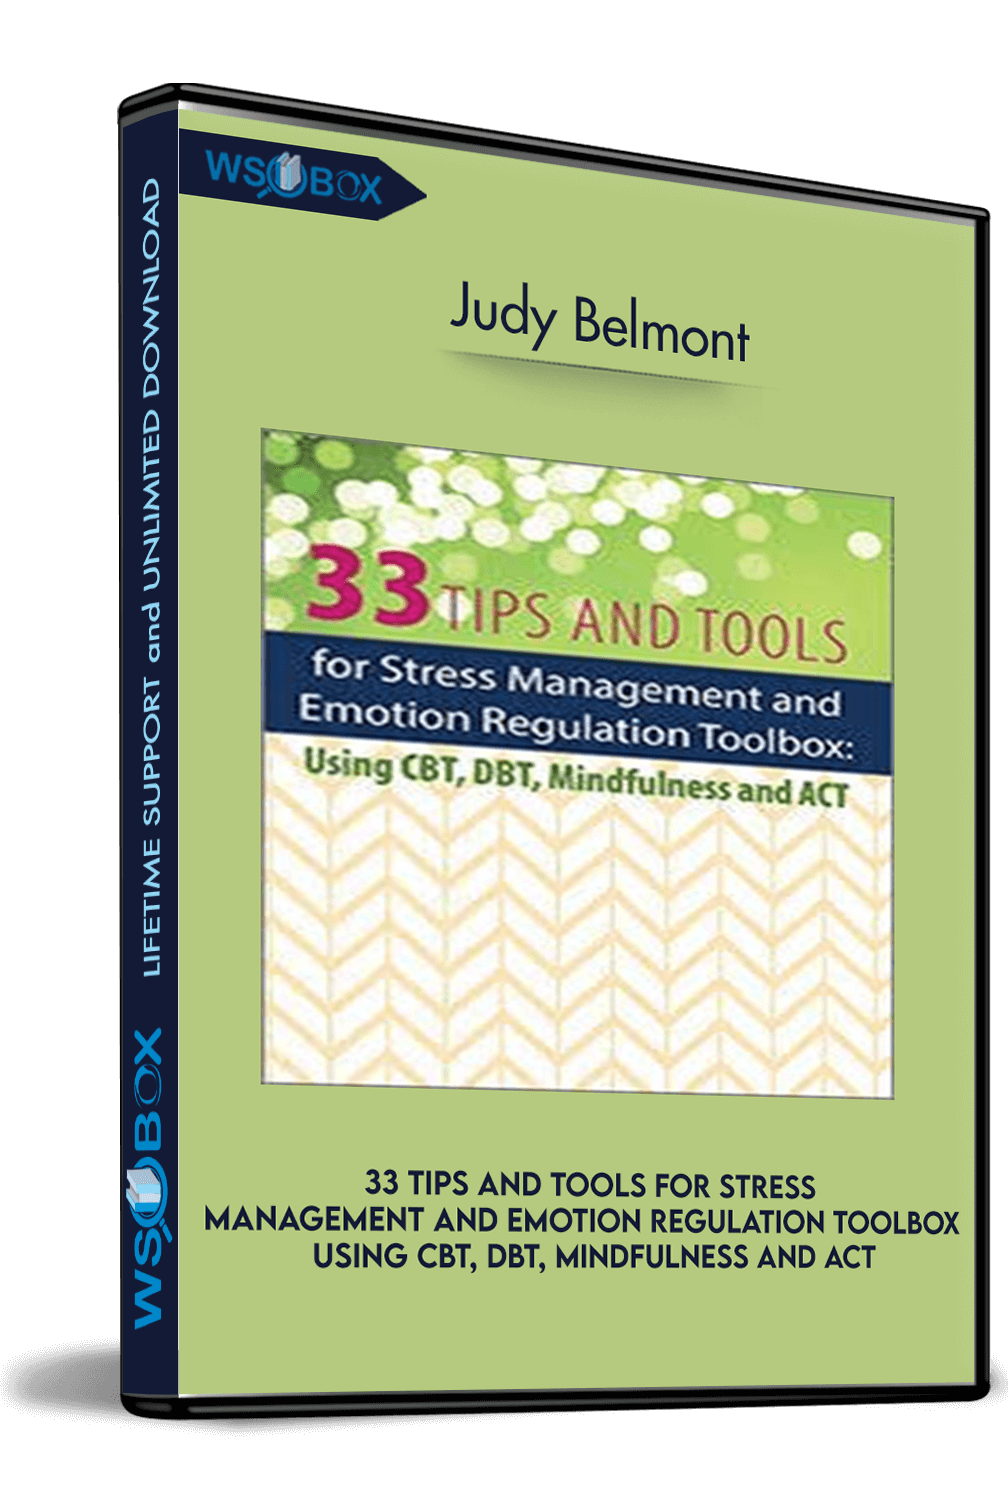 33-tips-and-tools-for-stress-management-and-emotion-regulation-toolbox-using-cbt-dbt-mindfulness-and-act-judy-belmont